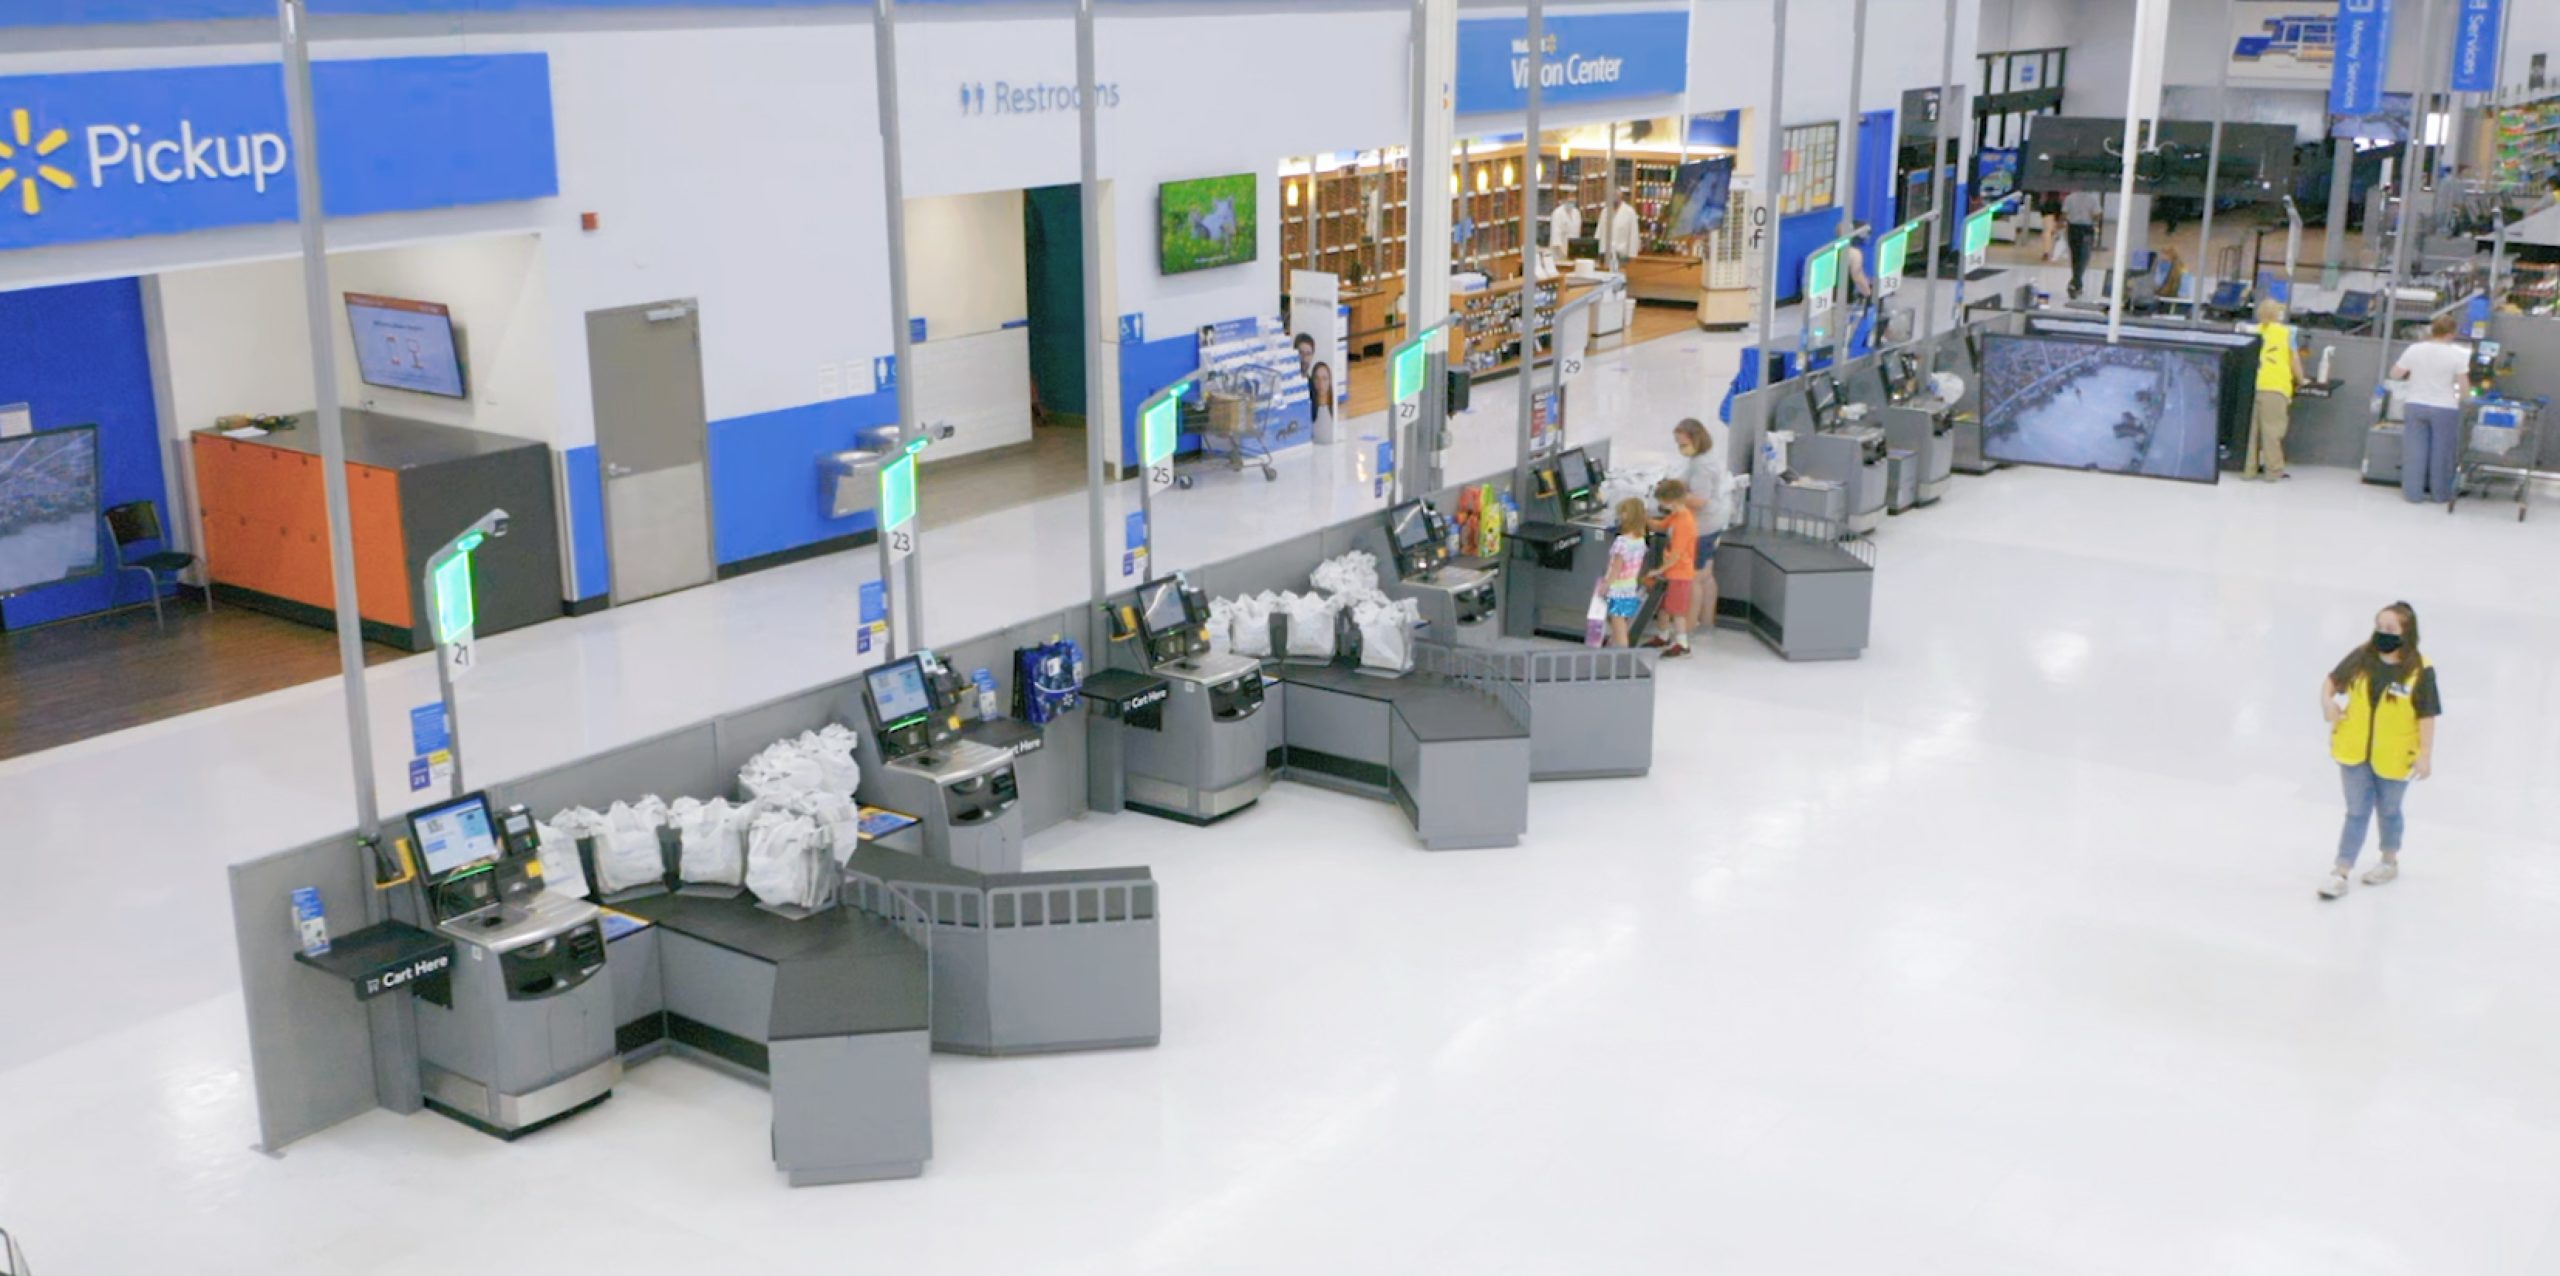 7877Walmart is rolling out its plan and testing cashier-less stores